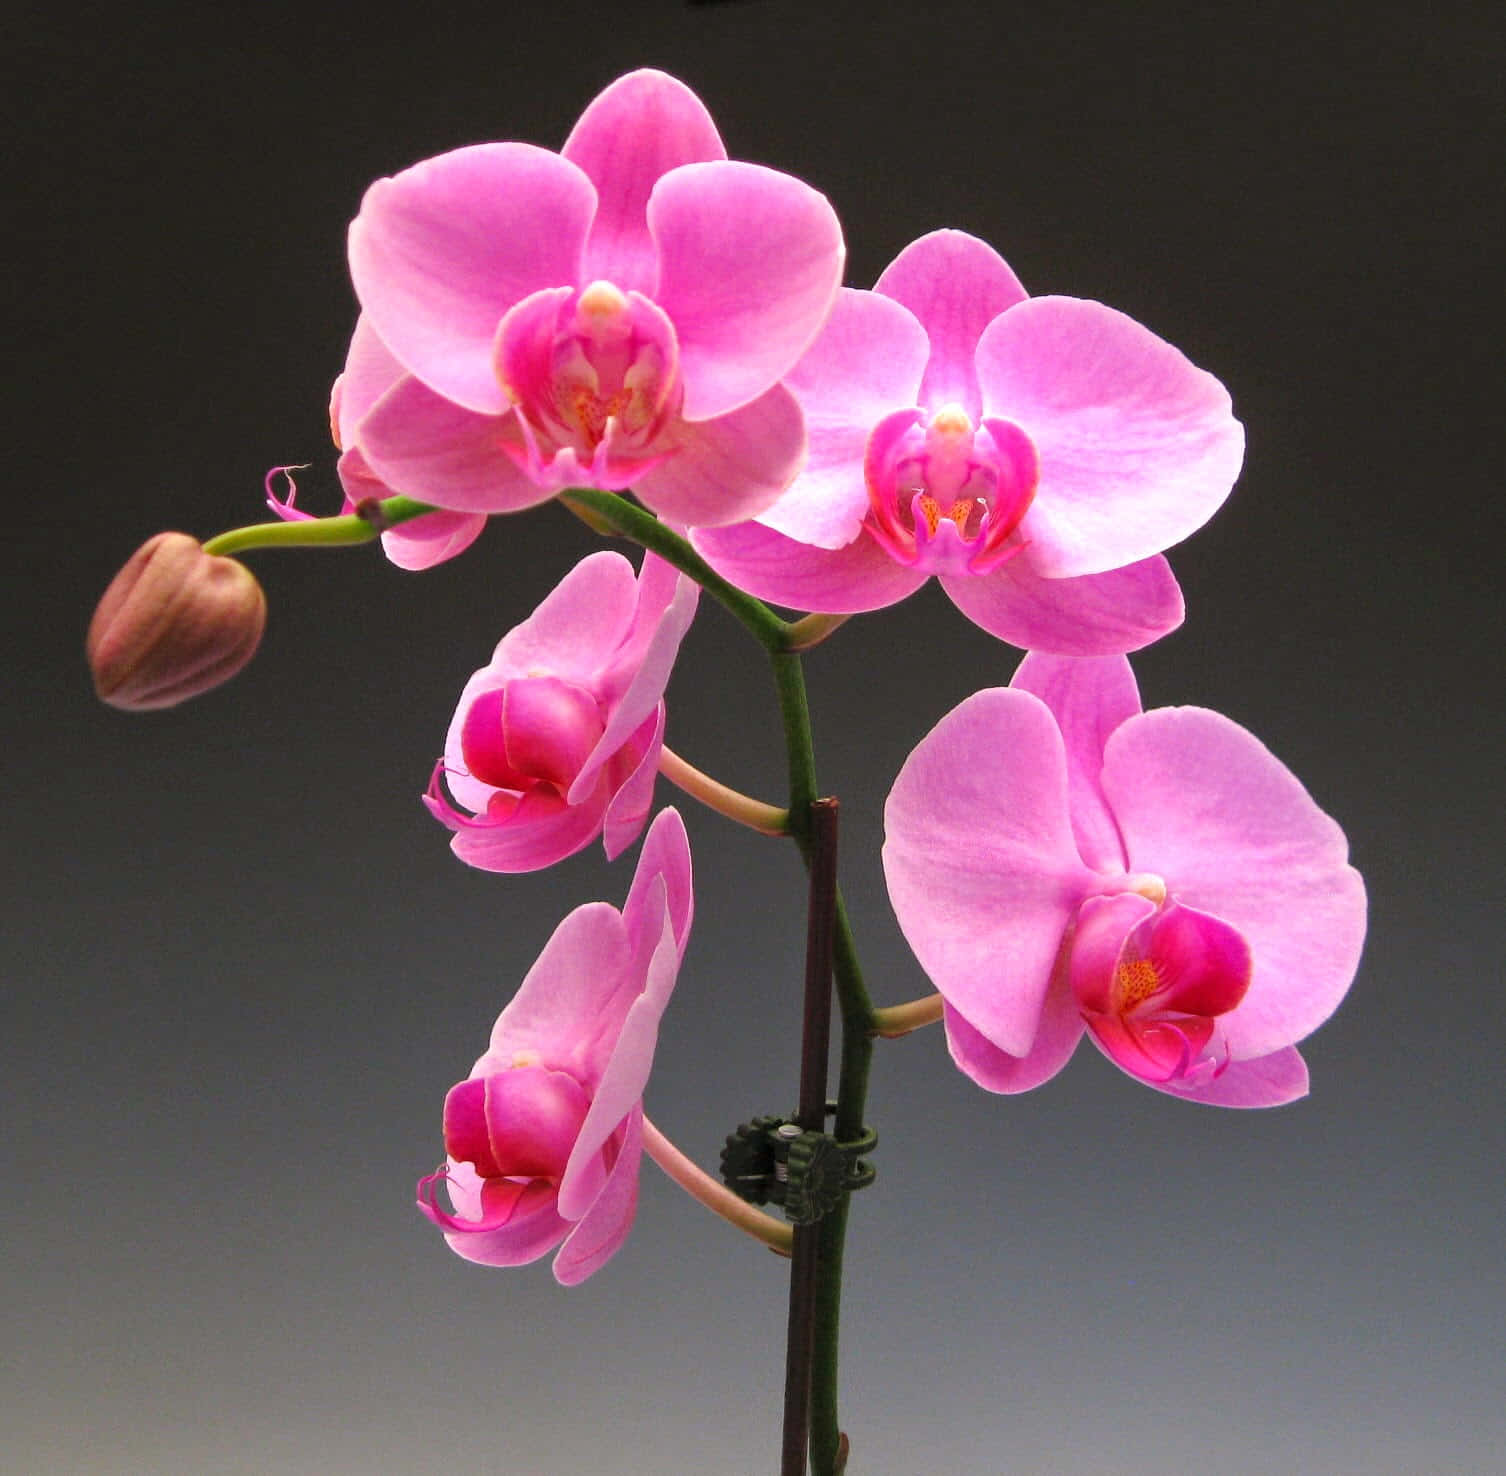 Nature's Beauty - An Orchid Blooming in Full Bloom